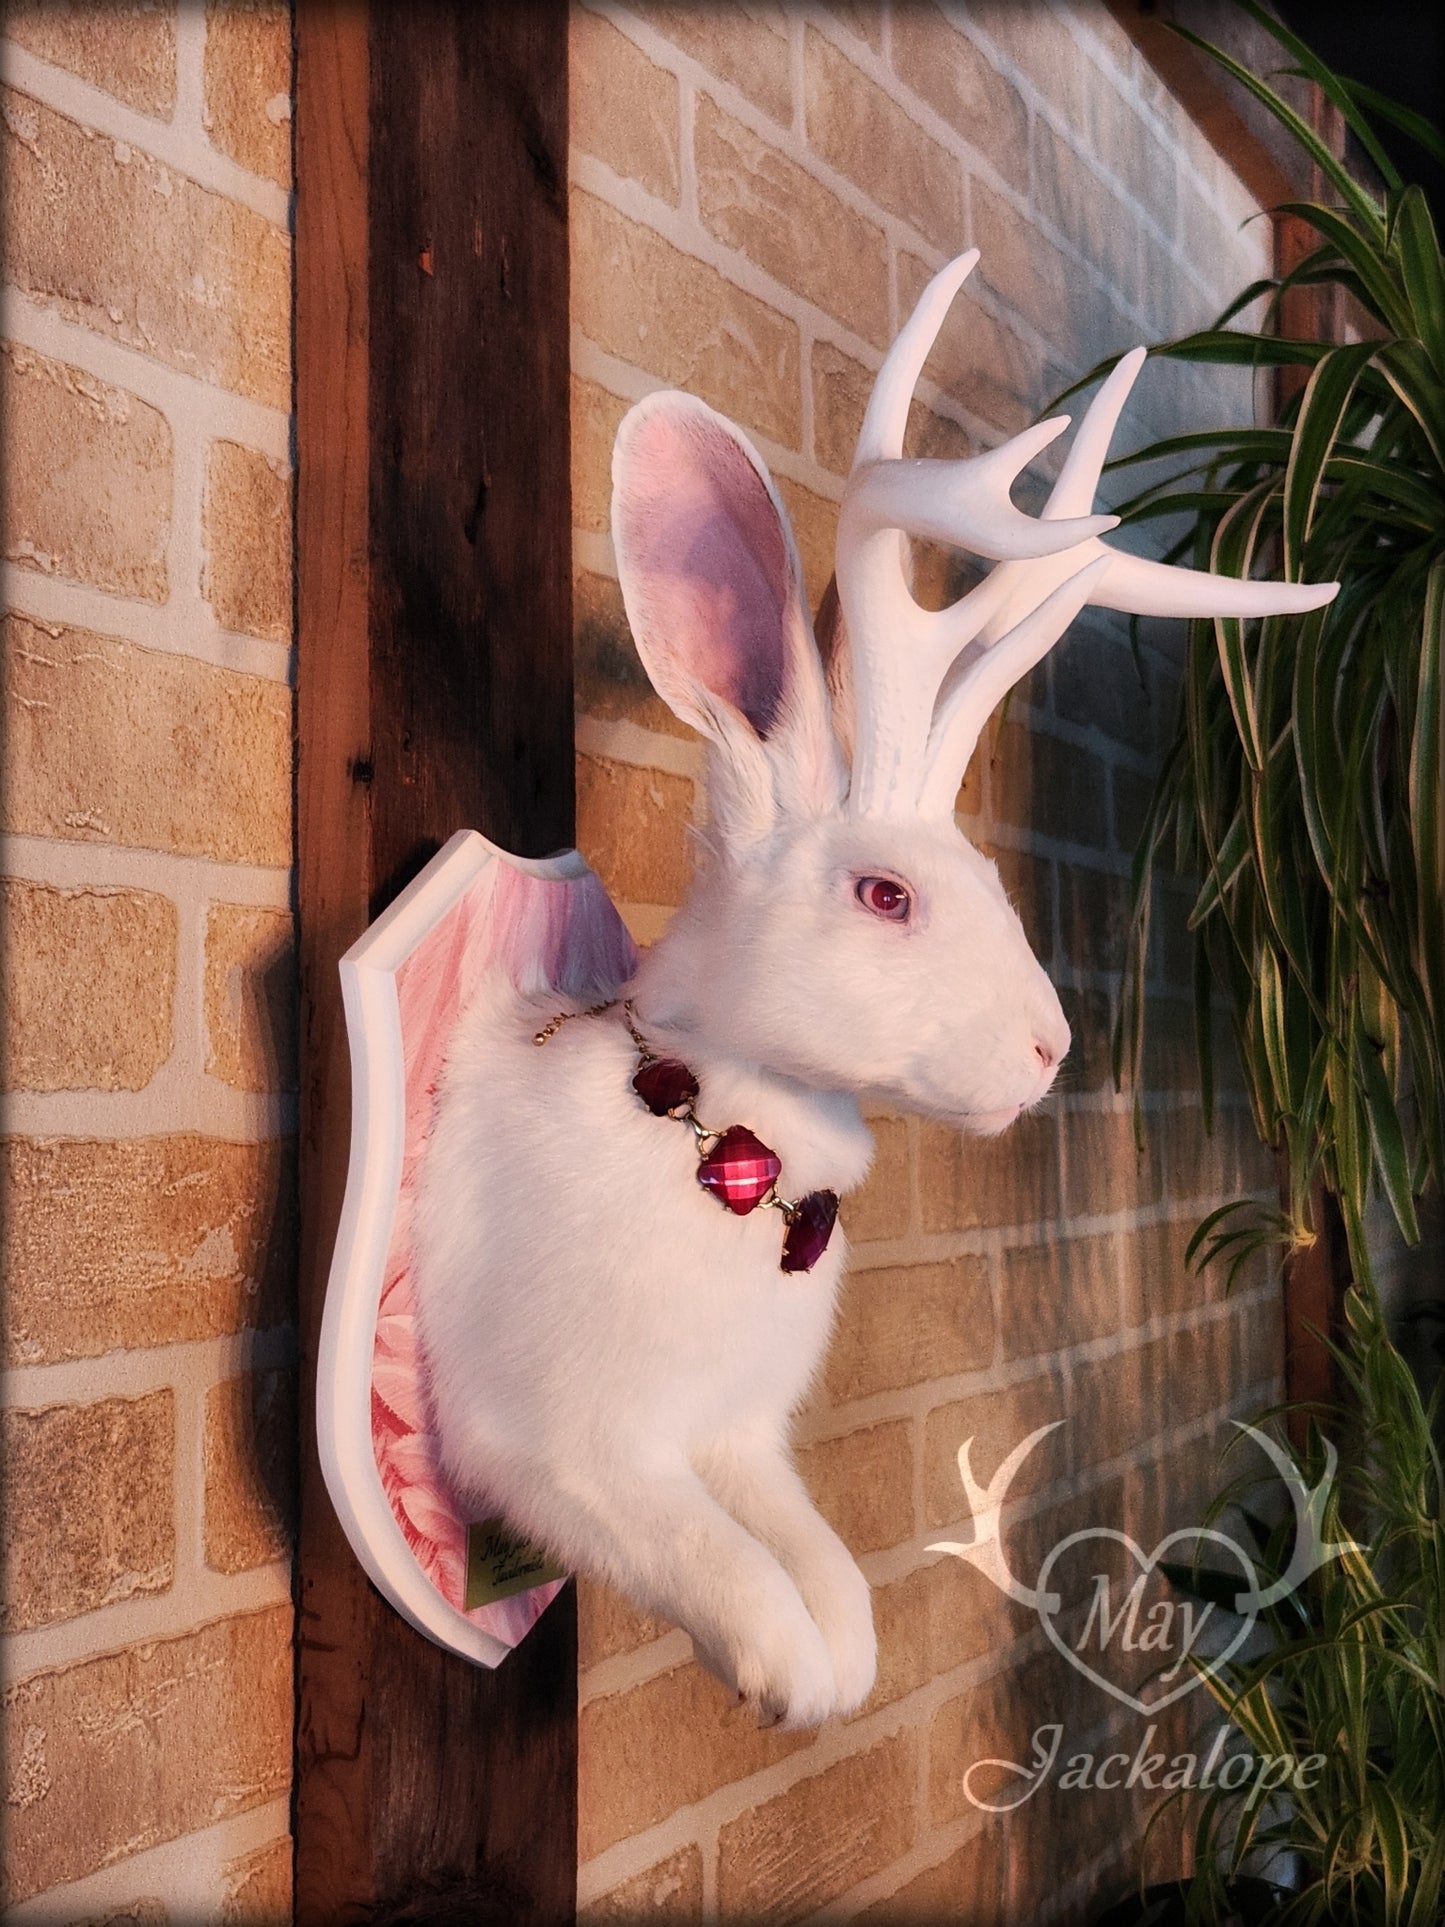 White Jackalope taxidermy with albino eyes, big white antlers replica & a necklace